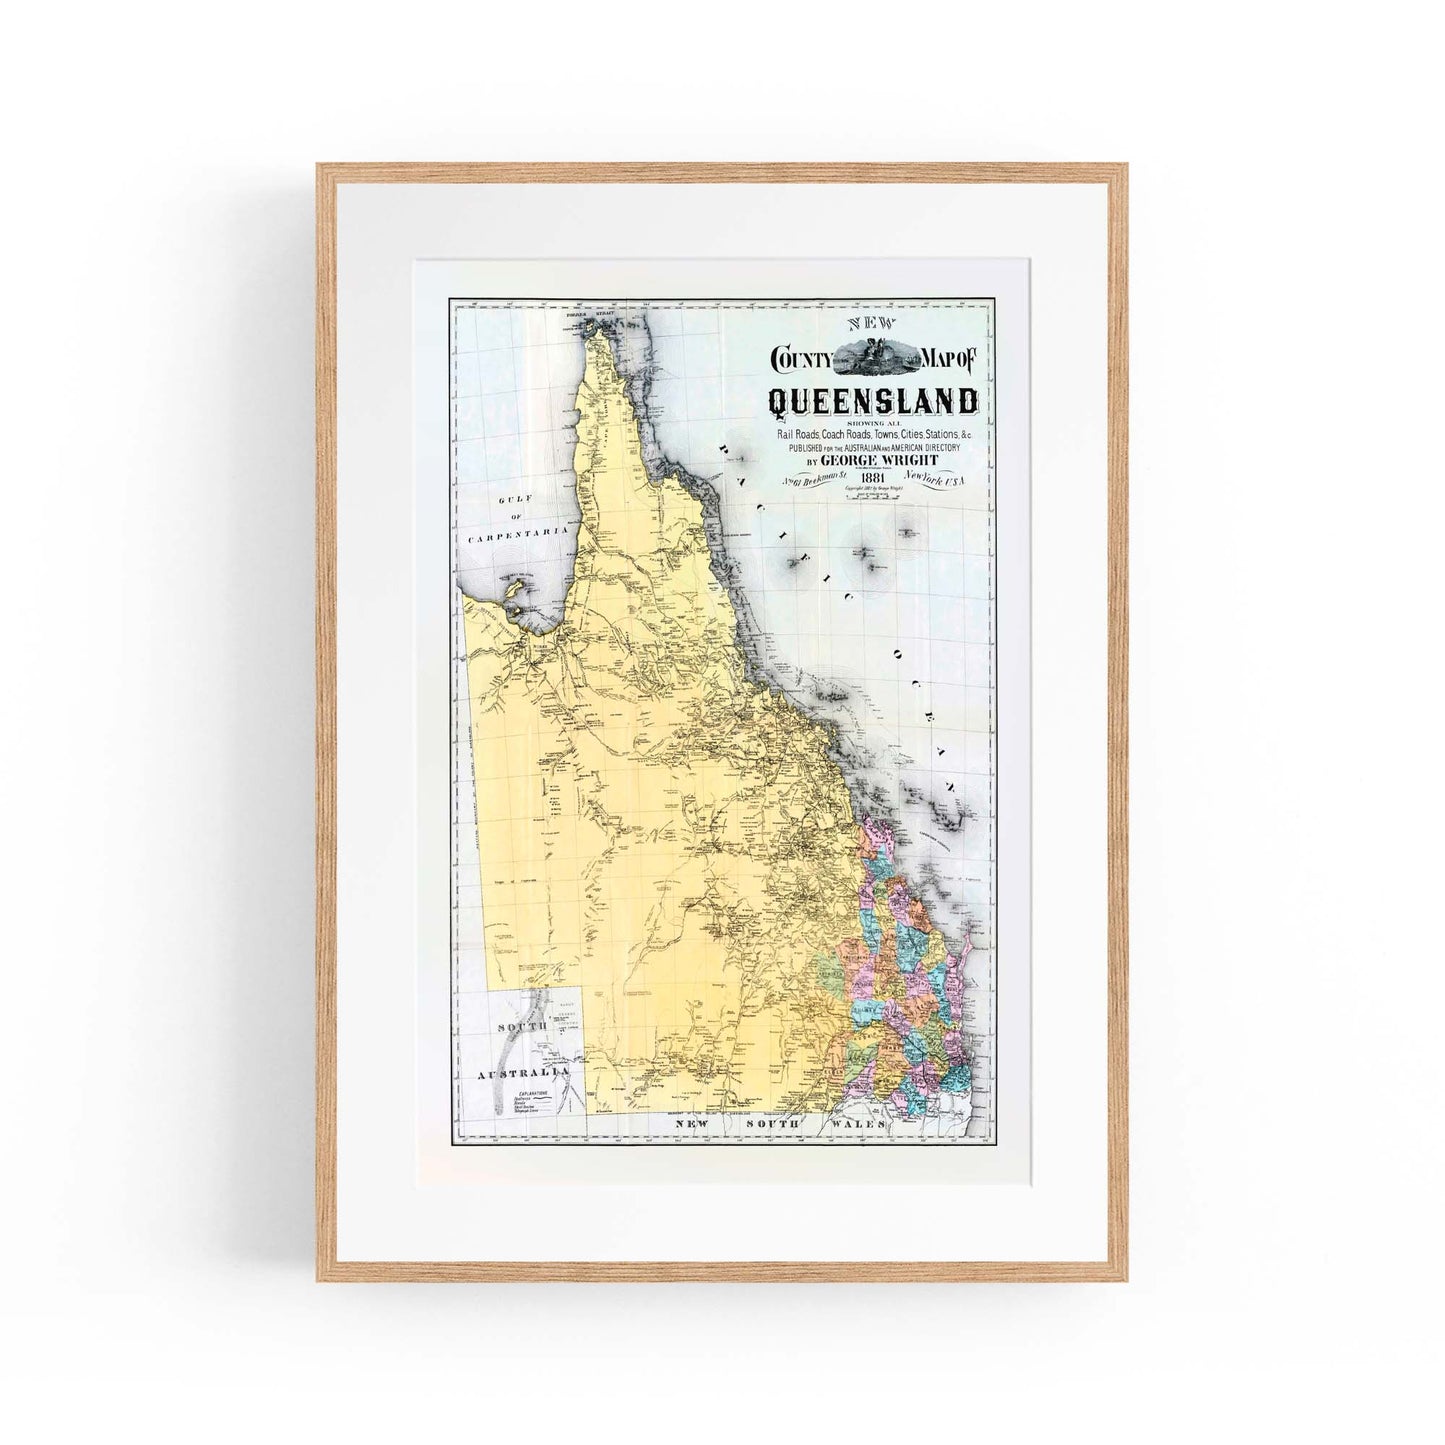 Queensland Australia Vintage Map Wall Art #2 - The Affordable Art Company